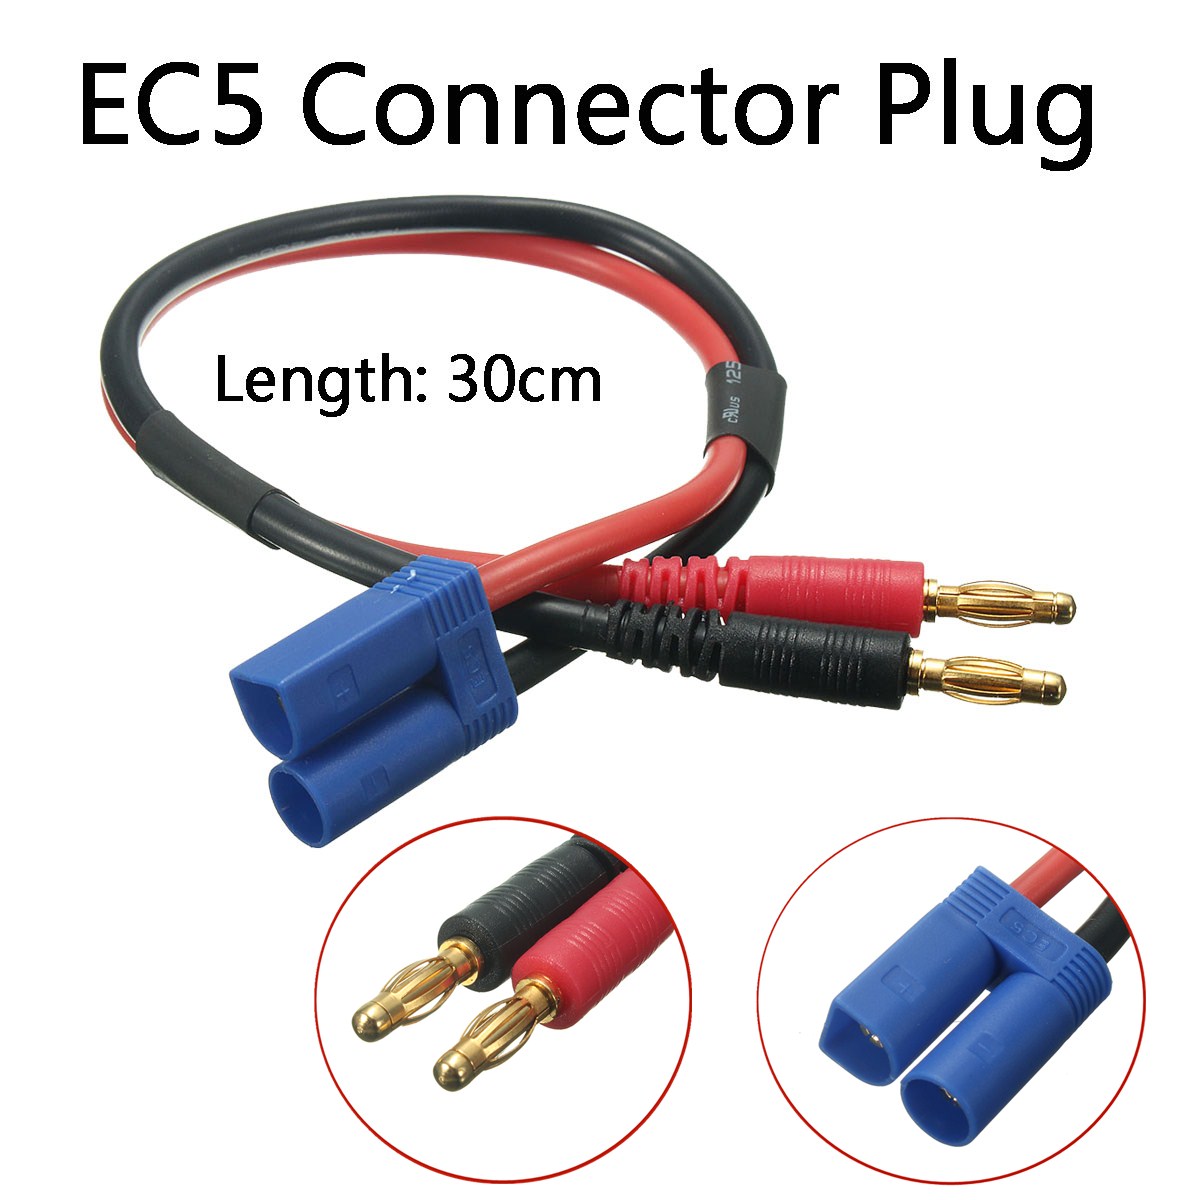 4mm-Banana-EC5-Plug-Charging-Cable-Lithium-Battery-Charging-Wire-1144660-1